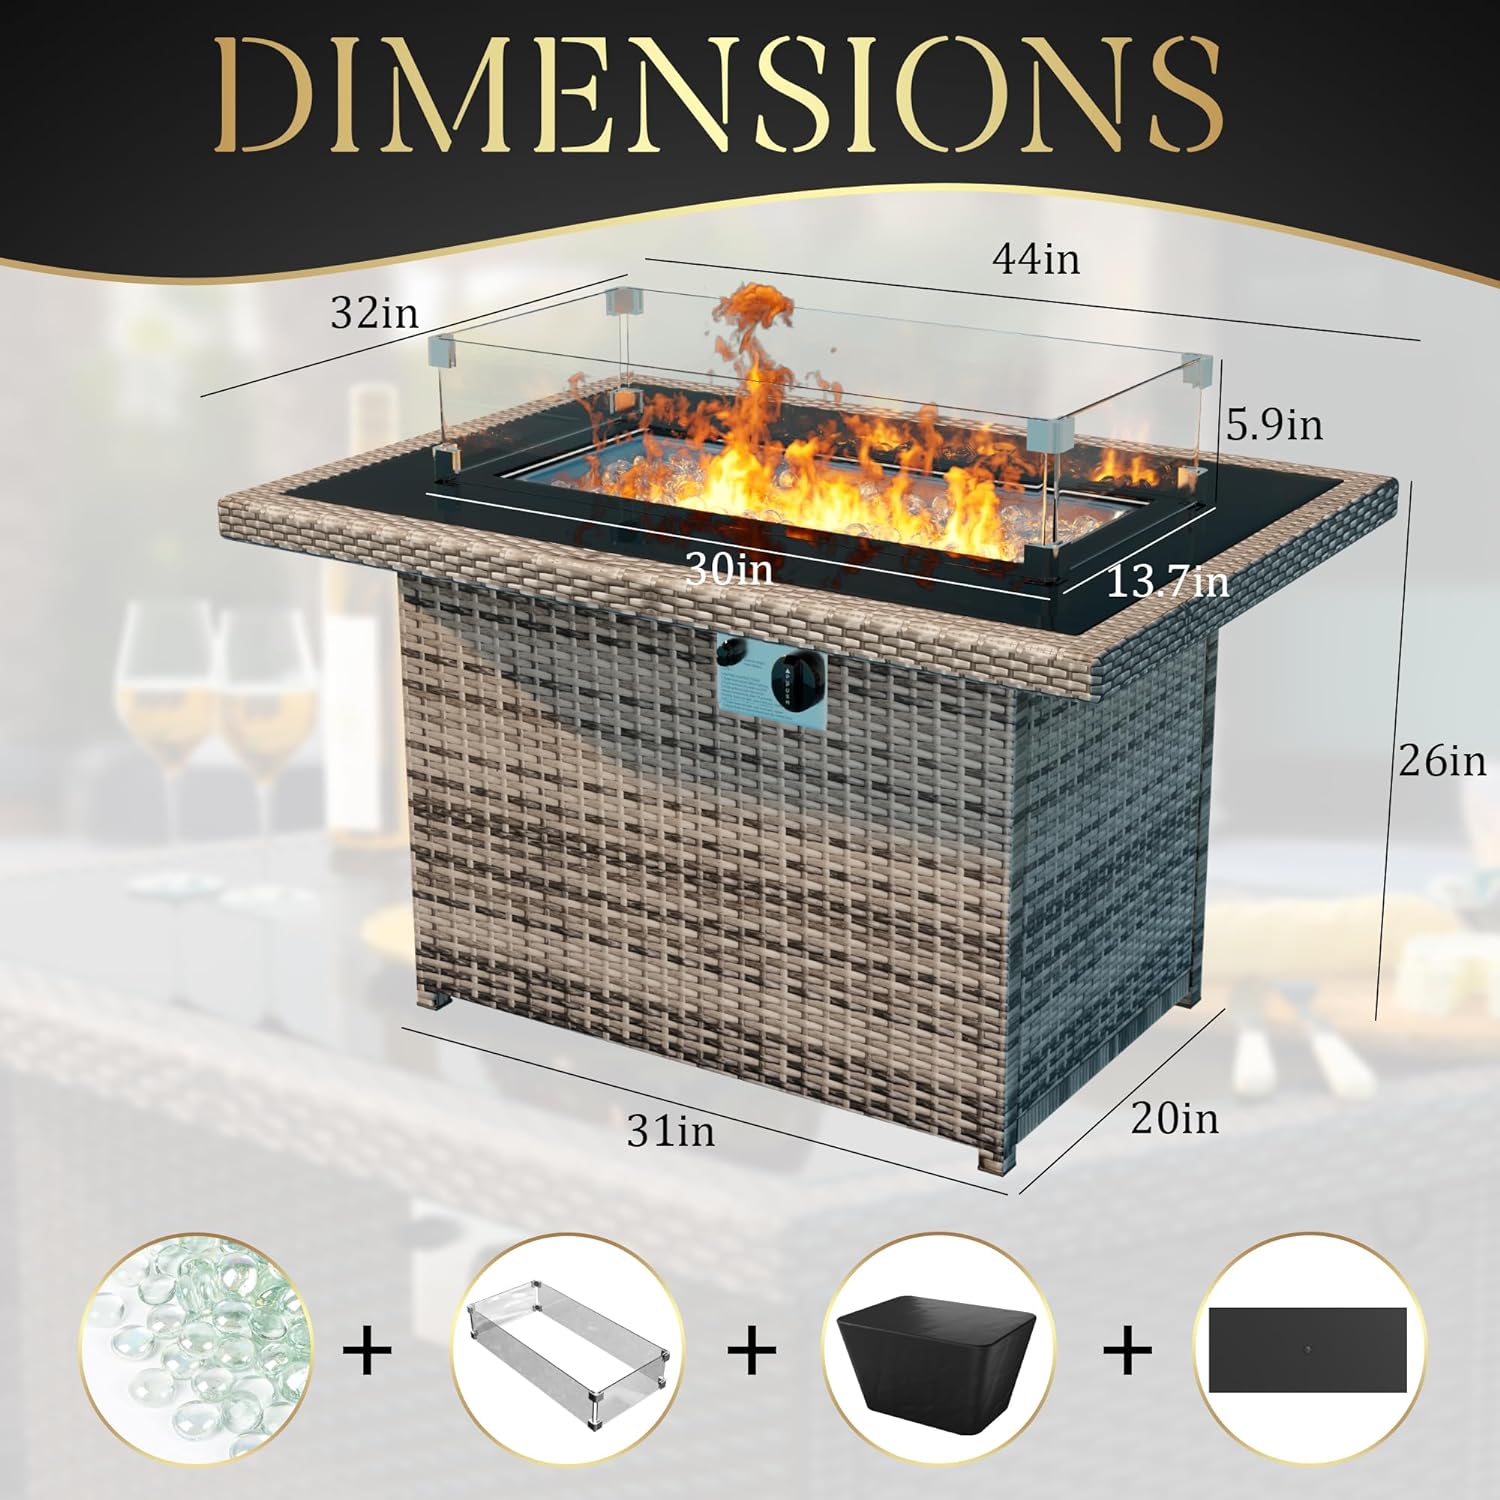 Yoyomax 44-Inch Fire Pit Table Review